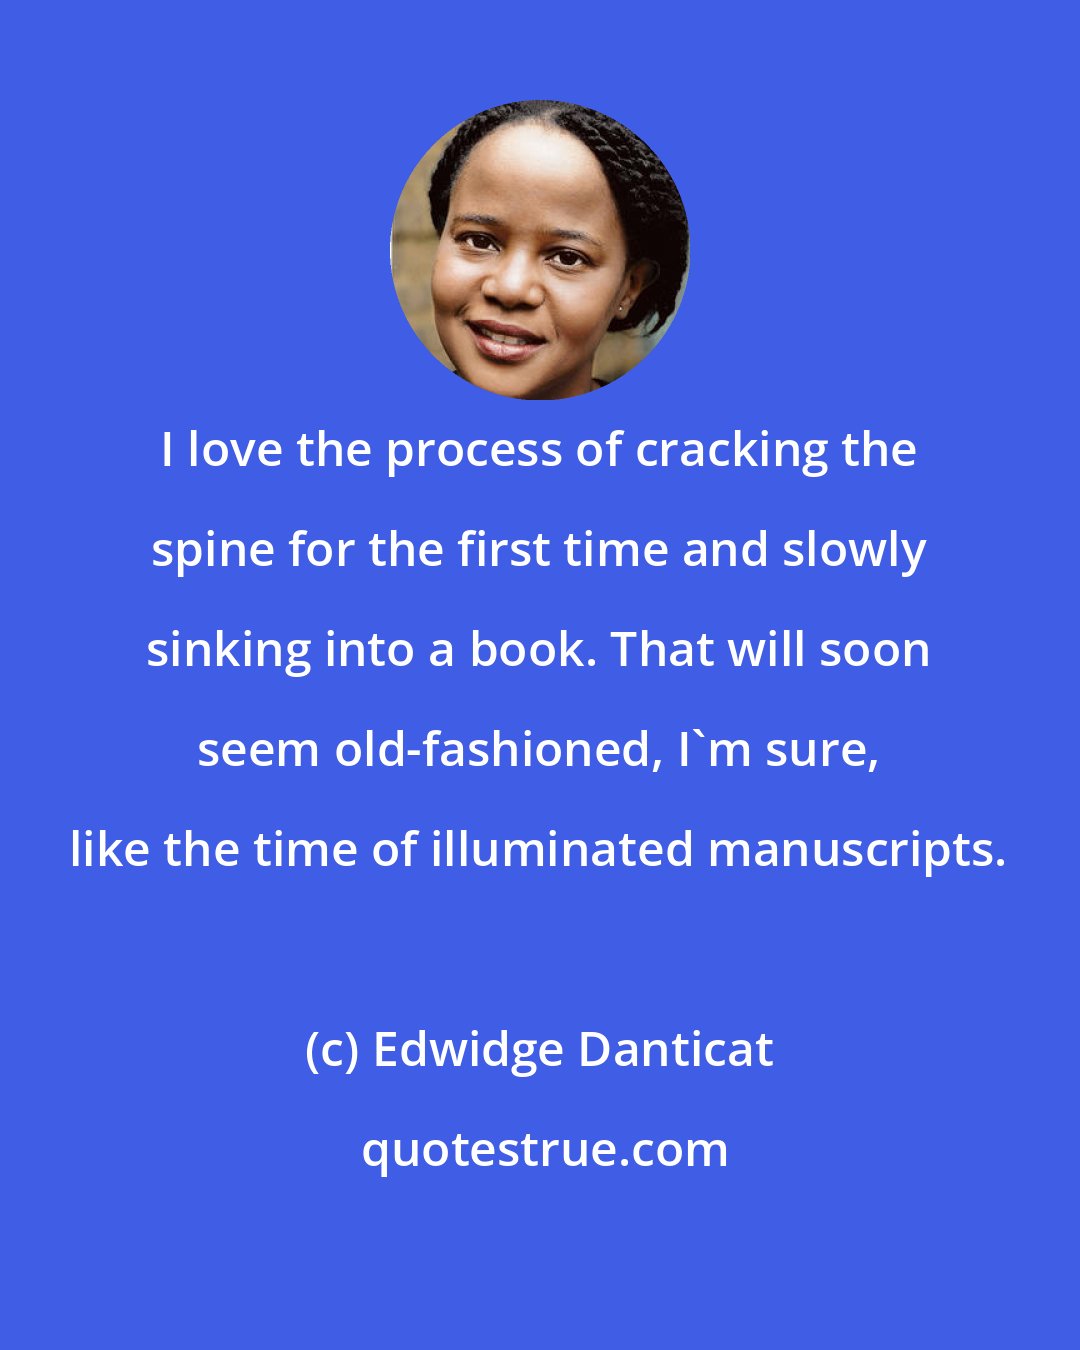 Edwidge Danticat: I love the process of cracking the spine for the first time and slowly sinking into a book. That will soon seem old-fashioned, I'm sure, like the time of illuminated manuscripts.